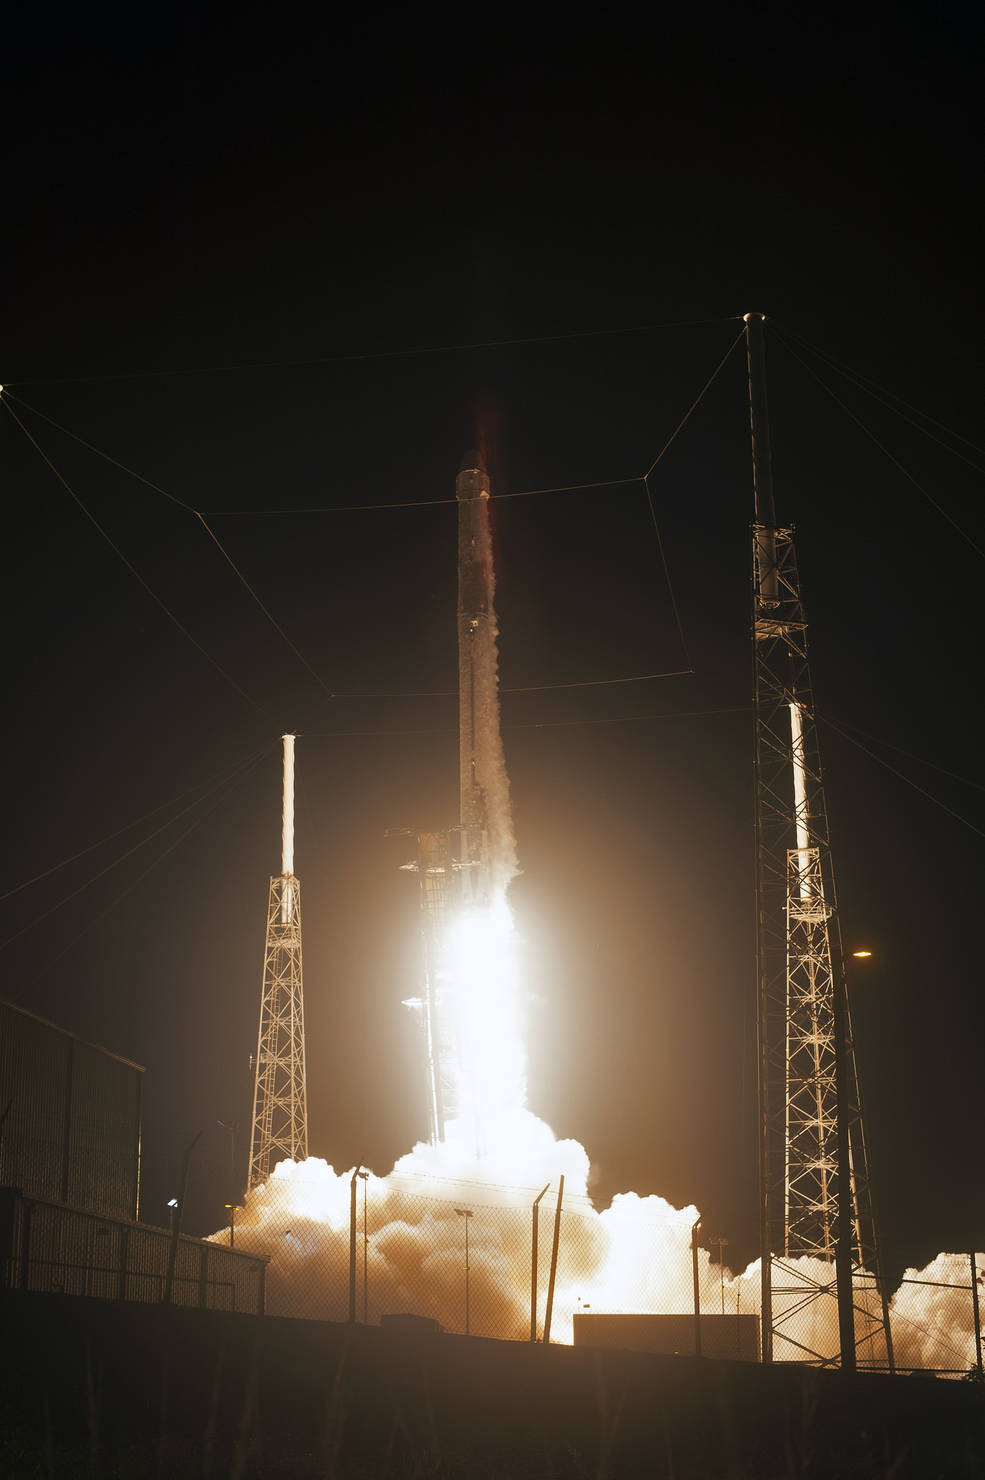 A two-stage SpaceX Falcon 9 launch vehicle lifts off from Space Launch Complex 40 at Cape Canaveral Air Force Station in Florida on June 29, 2018. SpaceX is targeting 1:38 p.m. EST Tuesday, Dec. 4, for the launch of its 16th resupply mission to the International Space Station.<br />Credits: NASA